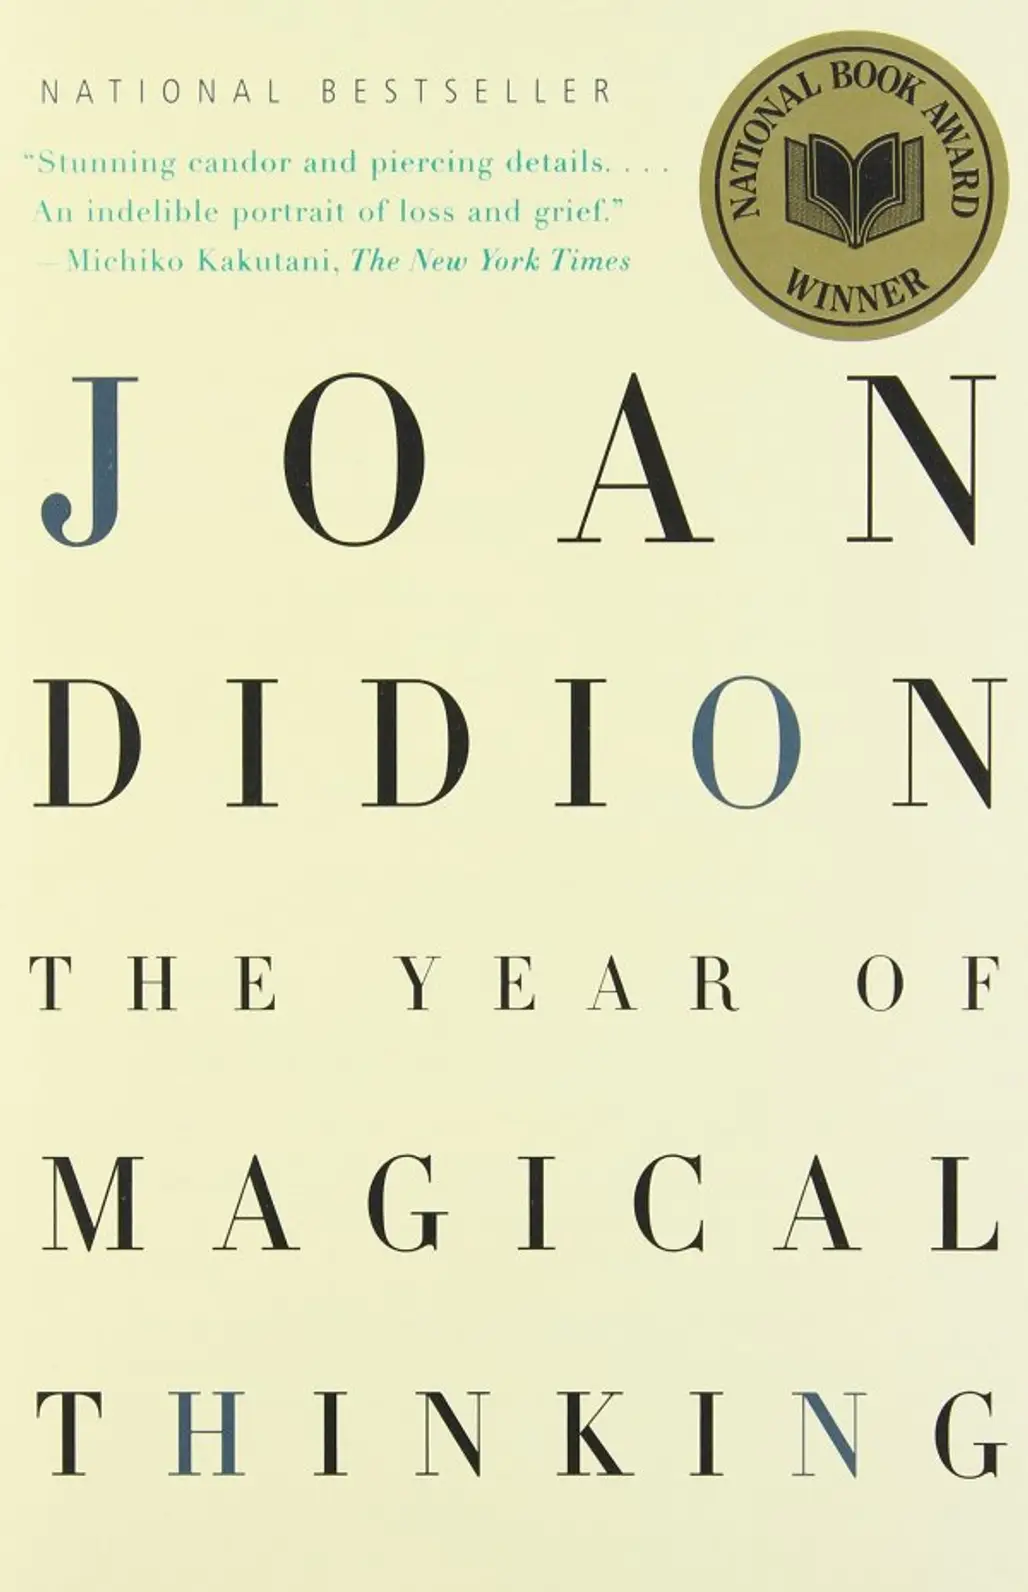 The Year of Magical Thinking – Joan Didion